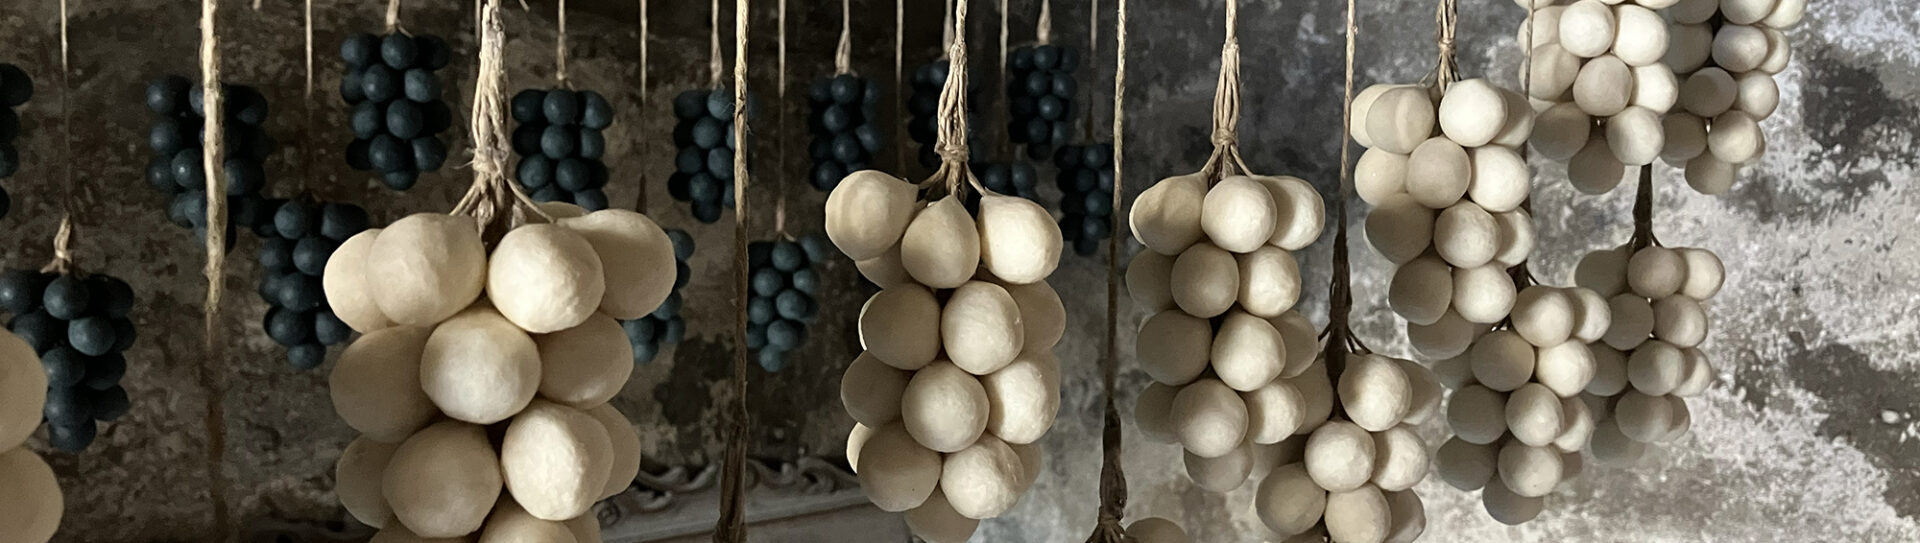 banner bunches of white grape soaps hang on a wire drying in the sun in lebanese family workshop